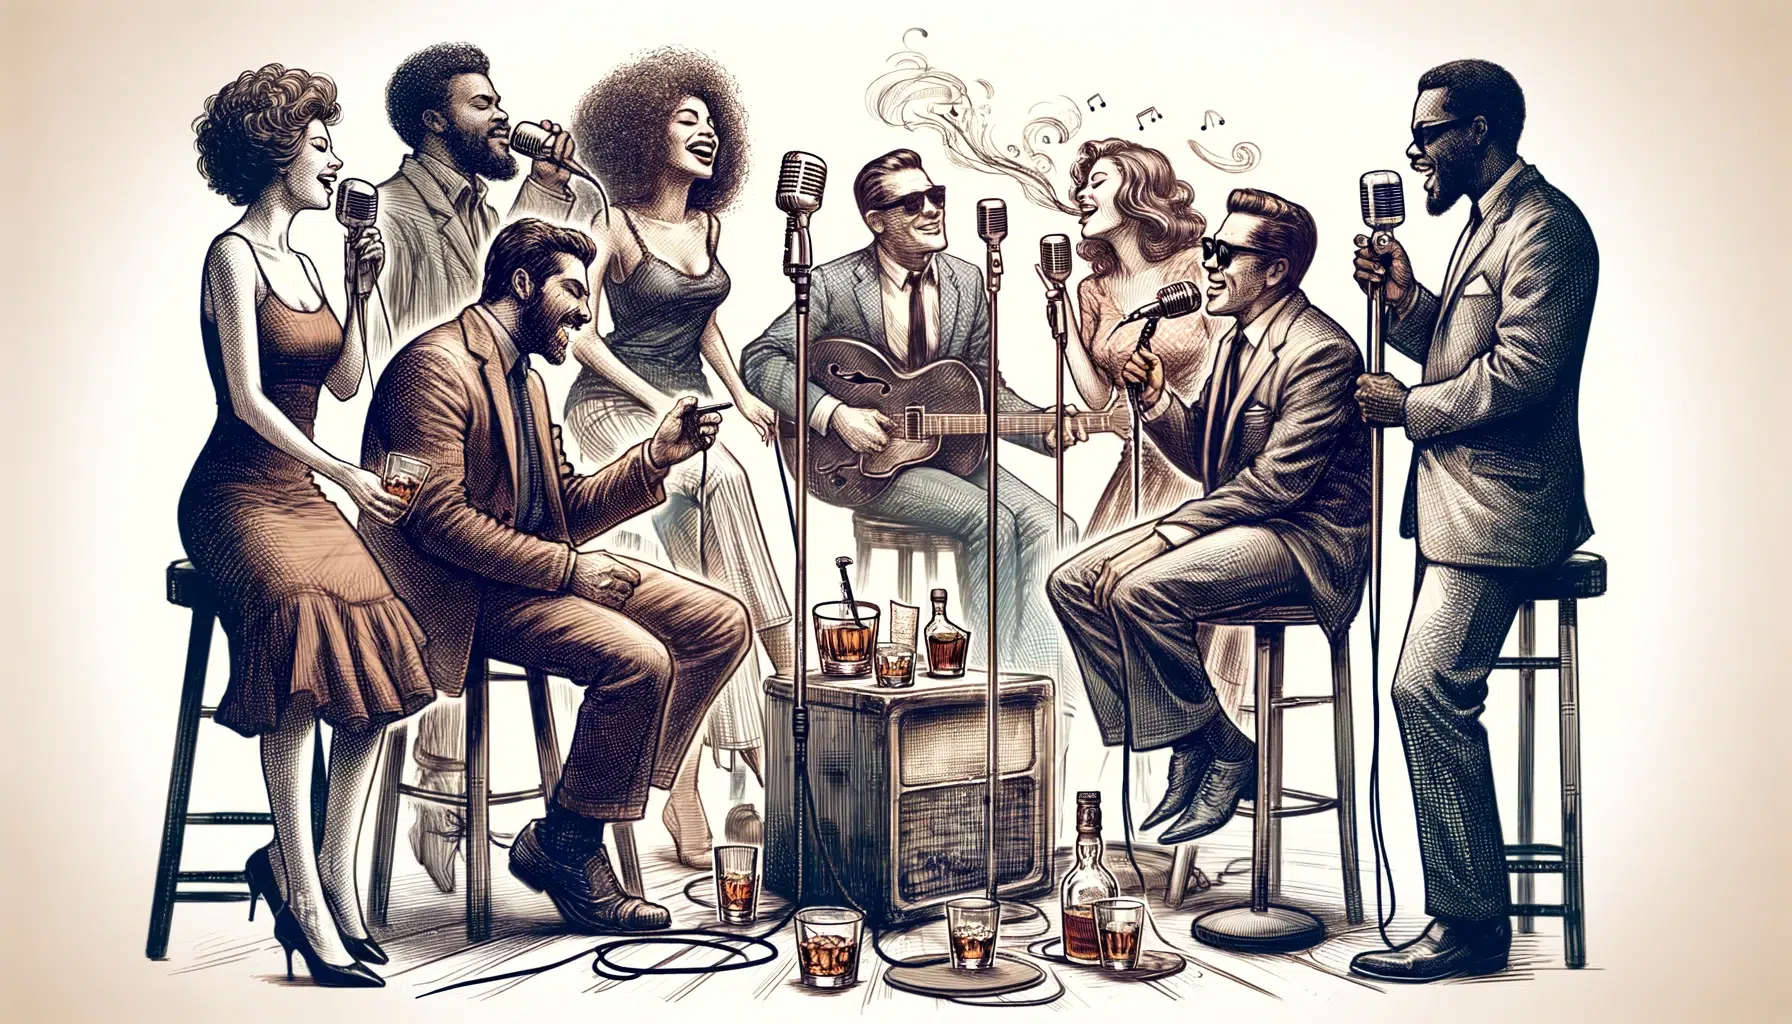 Vintage style music band illustration with singers and guitarist.